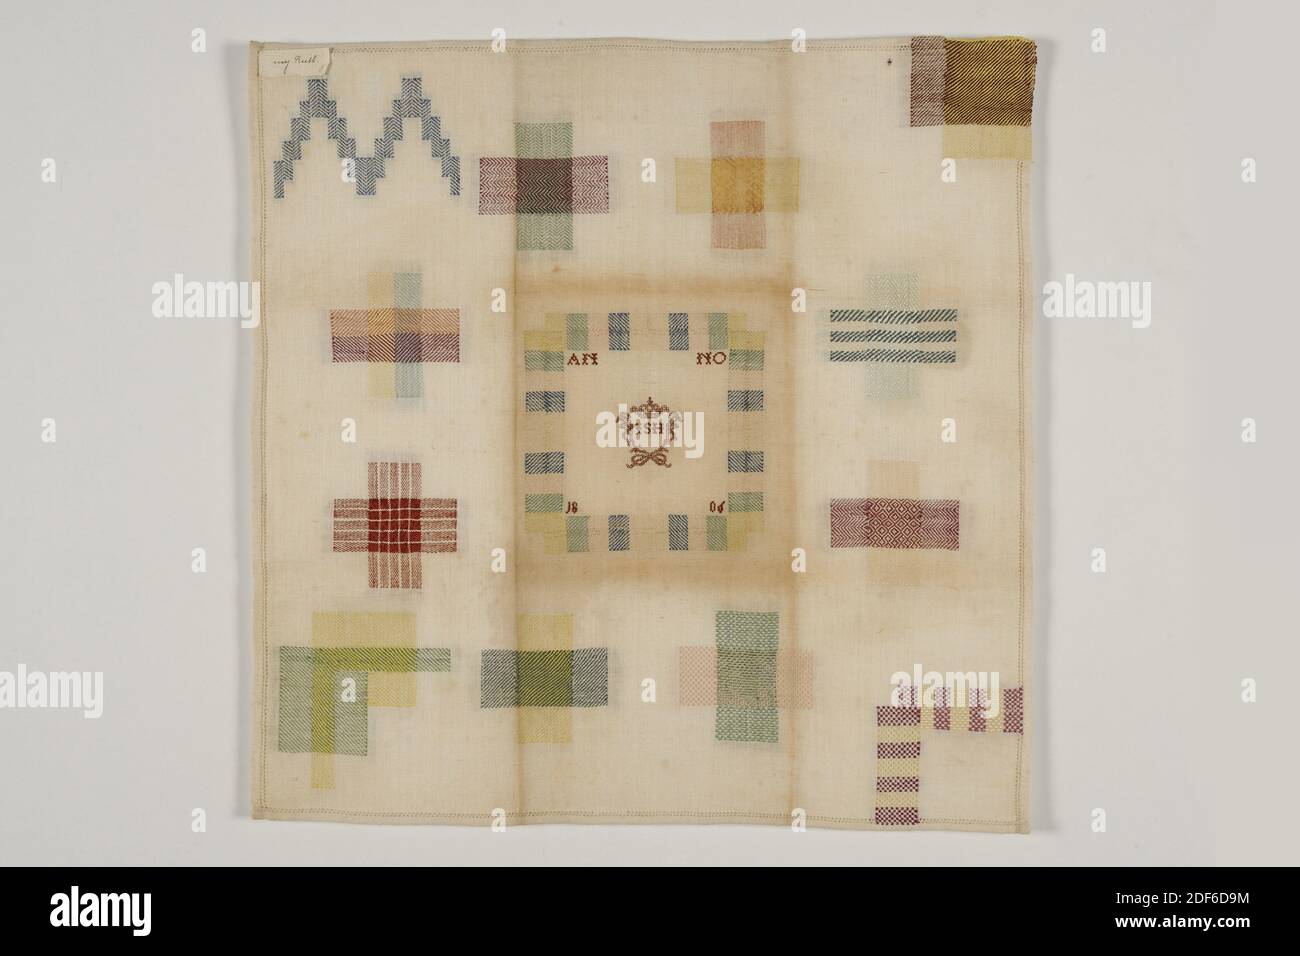 stopper, Anonymous, 1806, cotton, silk, General: 45 x 44.5cm (450 x 445mm), Cotton muslin stopper, tucked and embroidered with silk thread. With from left to right and from top to bottom: two stepped gables in doorstop, a cross stop in pointed twill and plain weave, a corner stop with selvedge, a cross stop in check twill and in plain weave with checkered pattern. The center panel is in twill with AN NO 18 06 in the center section in the corners and the center panel with JSH in the center. To the right of this a cross-stop with herringbone in stripe pattern and in diamond twill Stock Photo